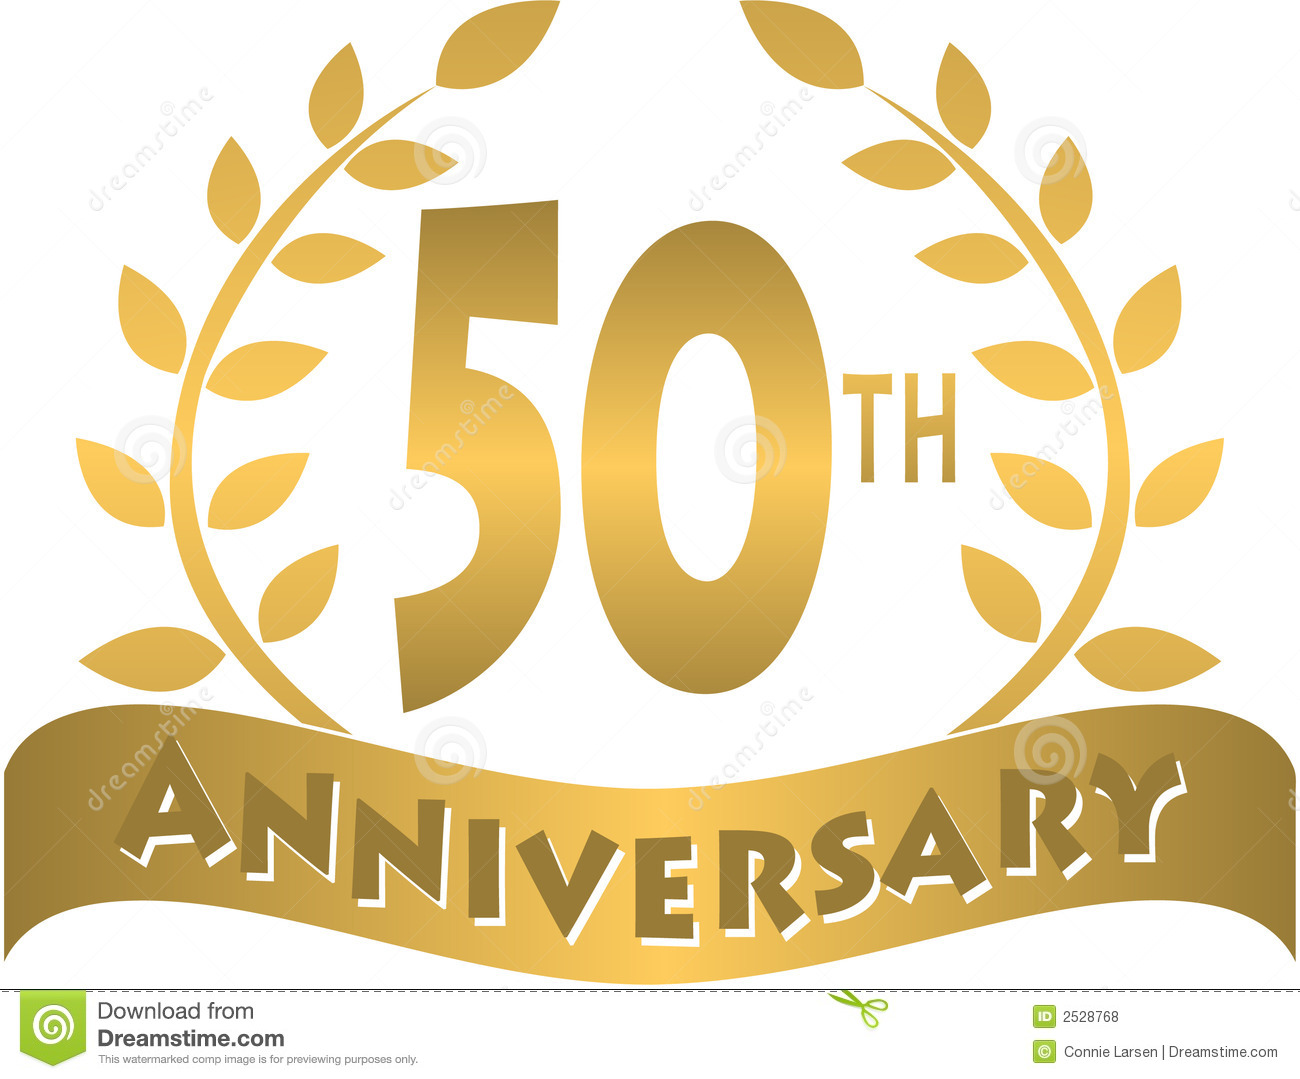 Logo For A 50th Or Golden Anniversary Of A Marriage Or Business   Eps